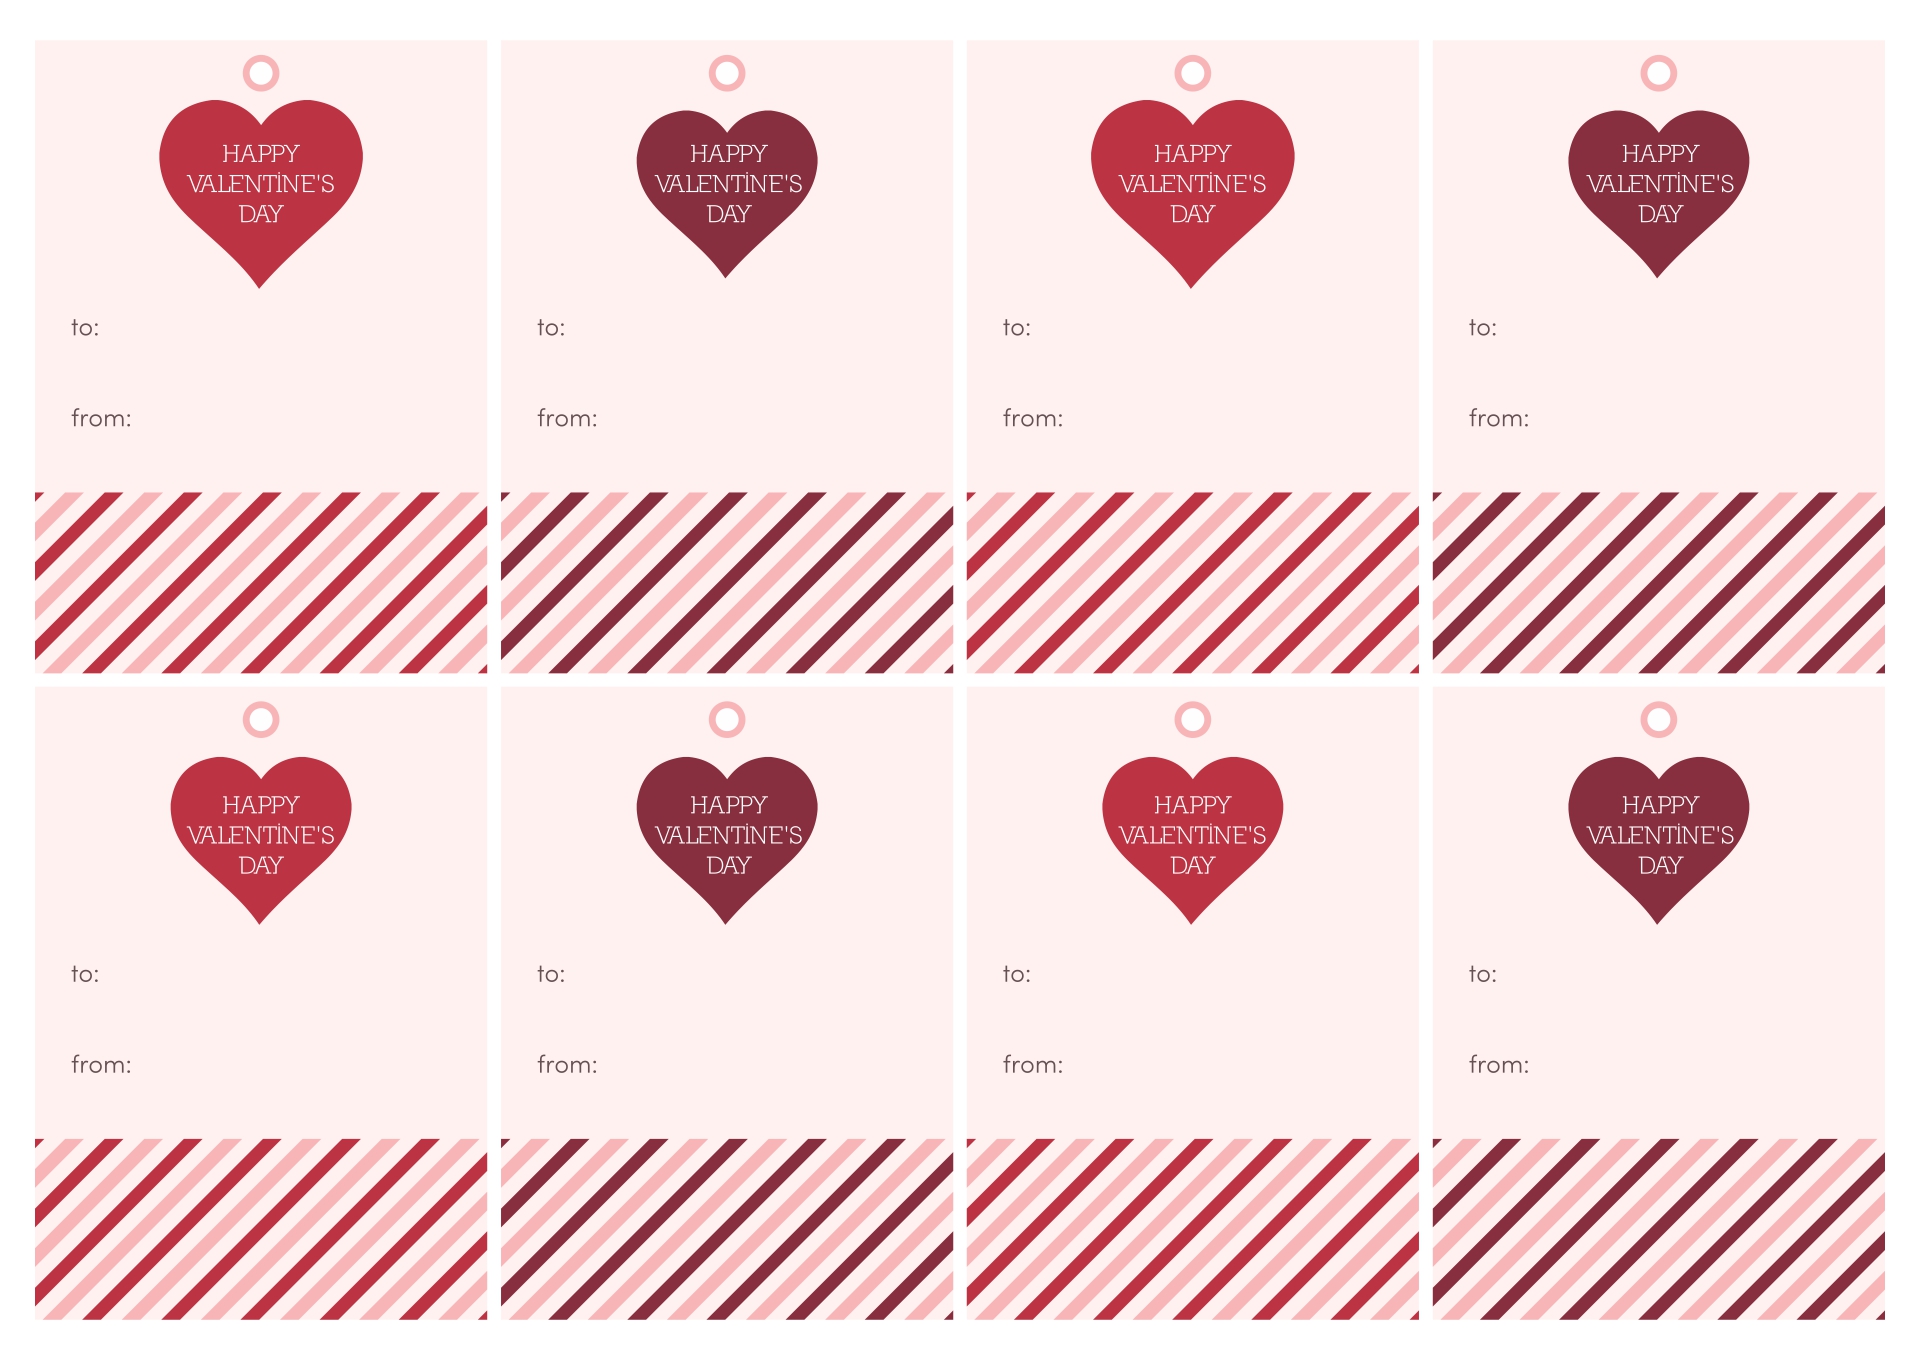 7 Best Images of Printable Animal Valentine's Gift Tags - Free